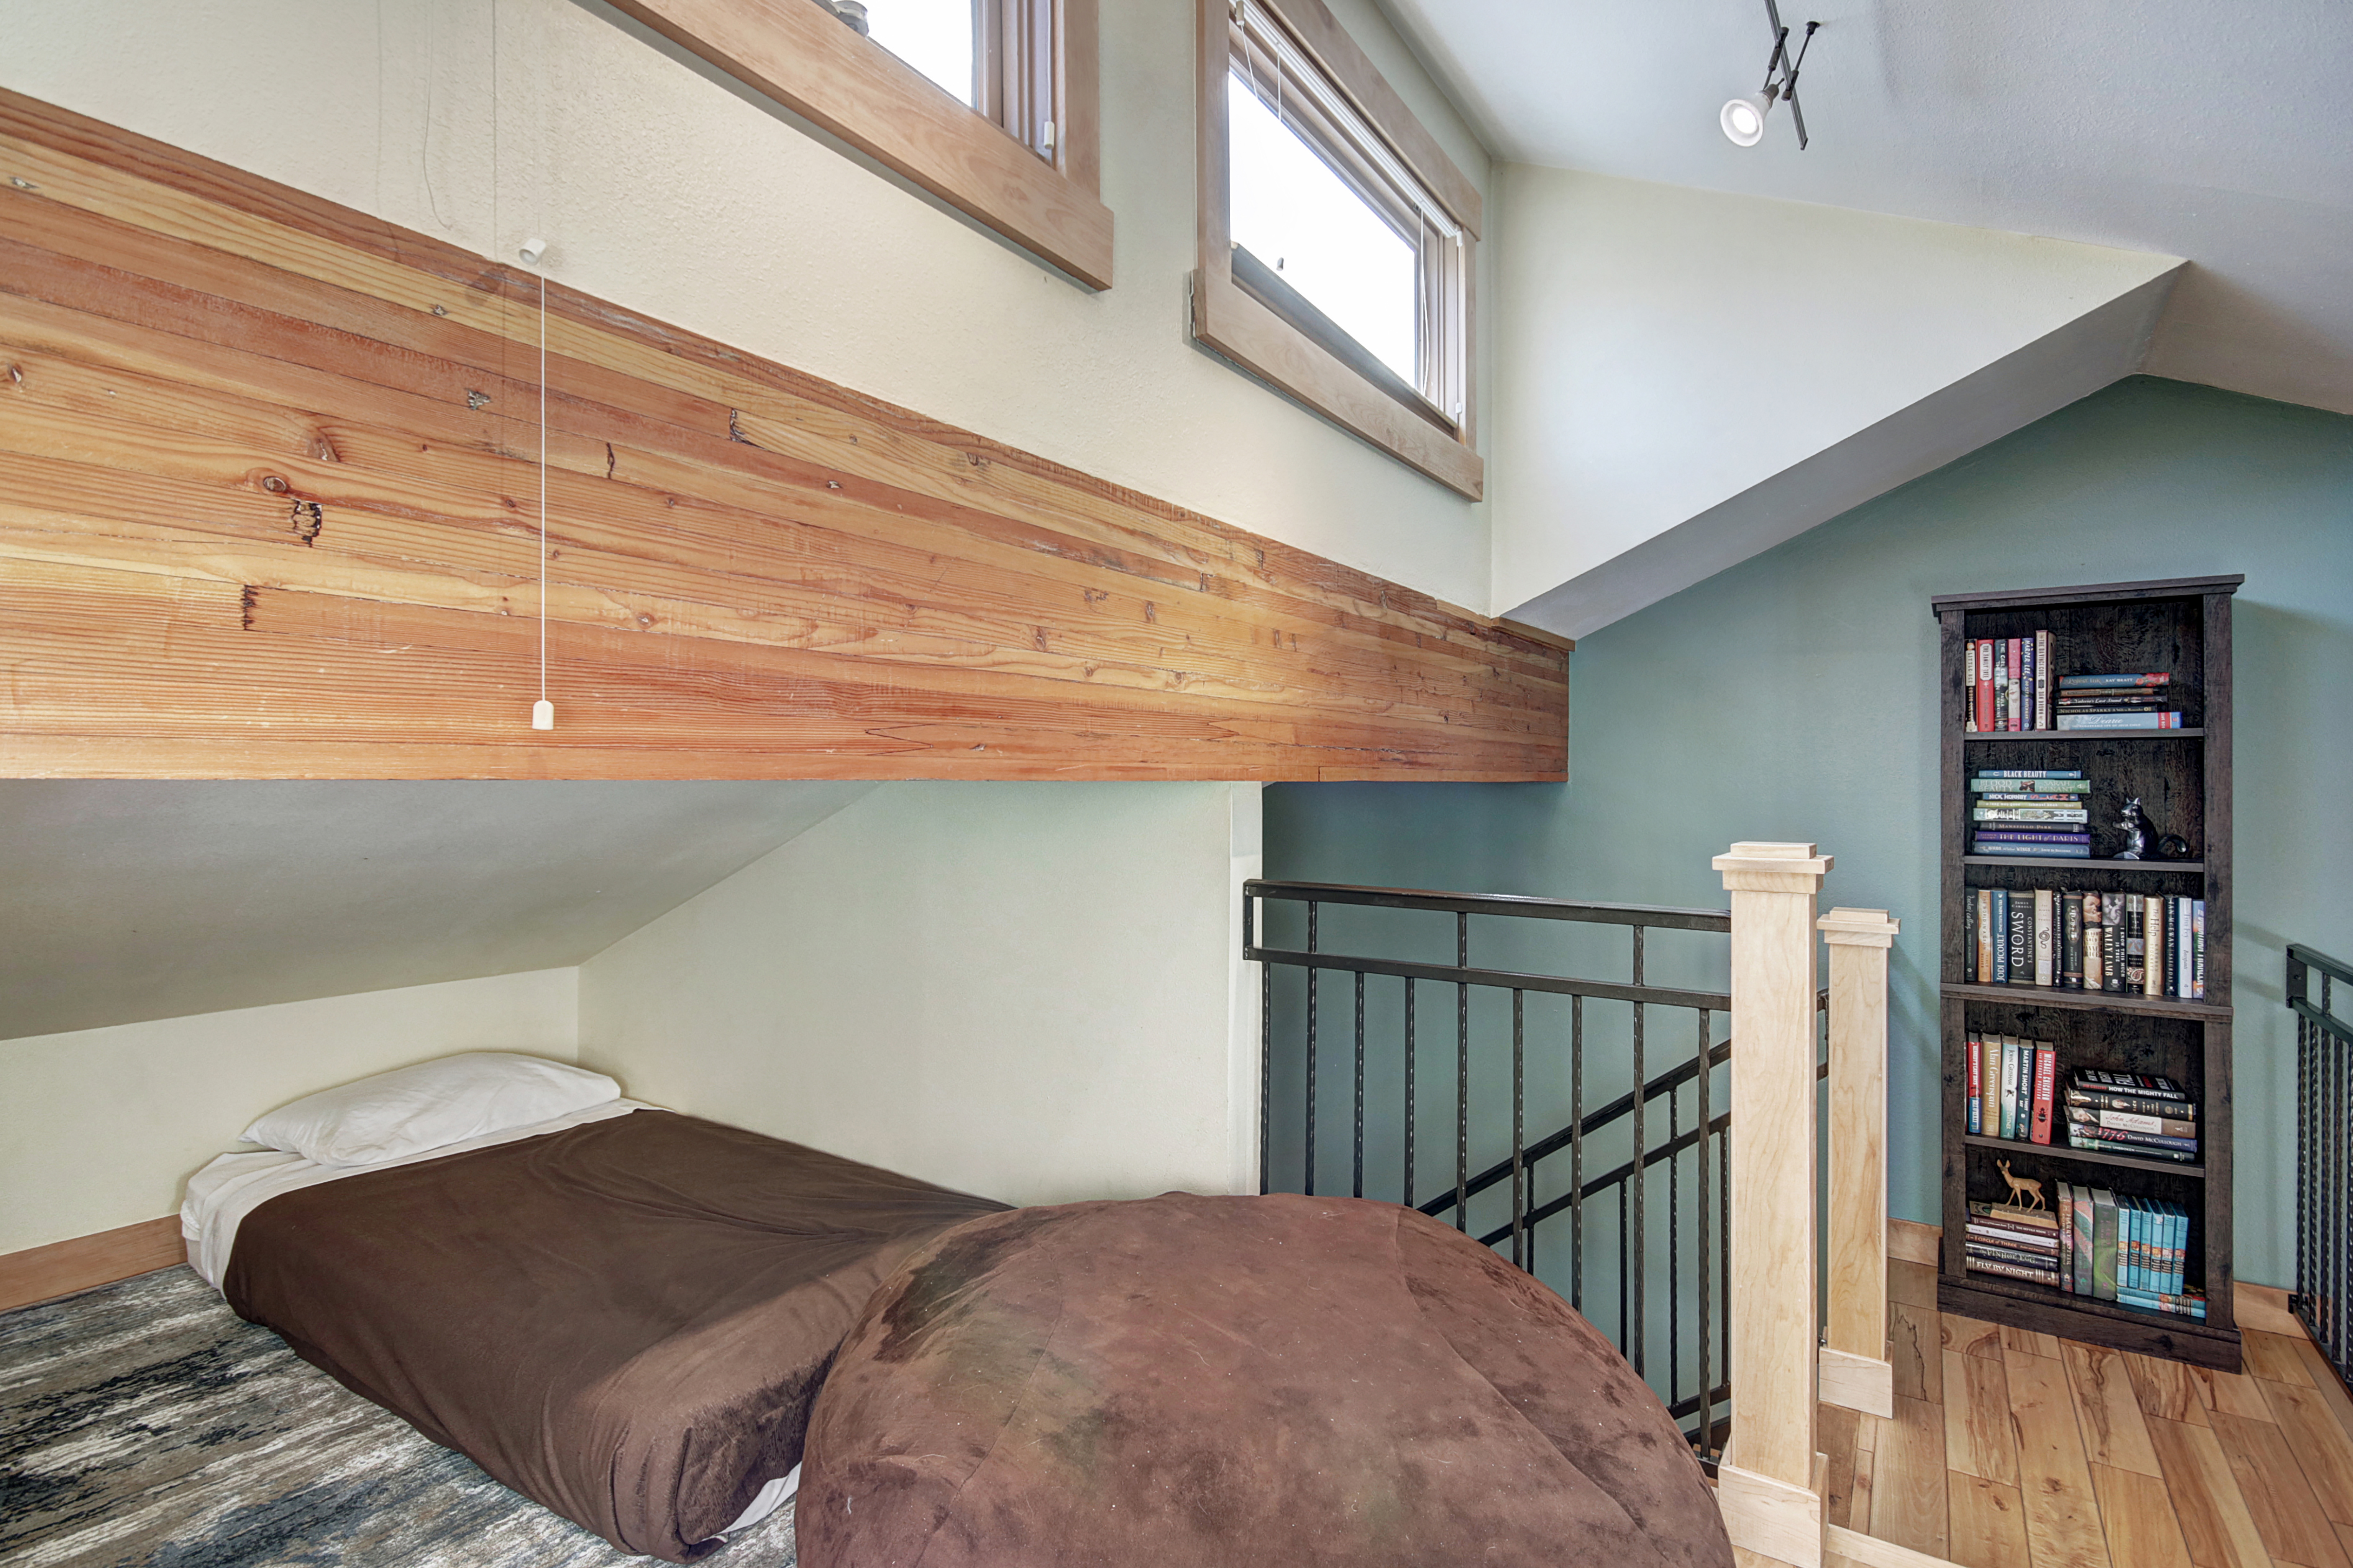 One Queen and one Twin bed are located in the upper level loft - 4 O’Clock Lodge D26 Breckenridge Vacation Rental